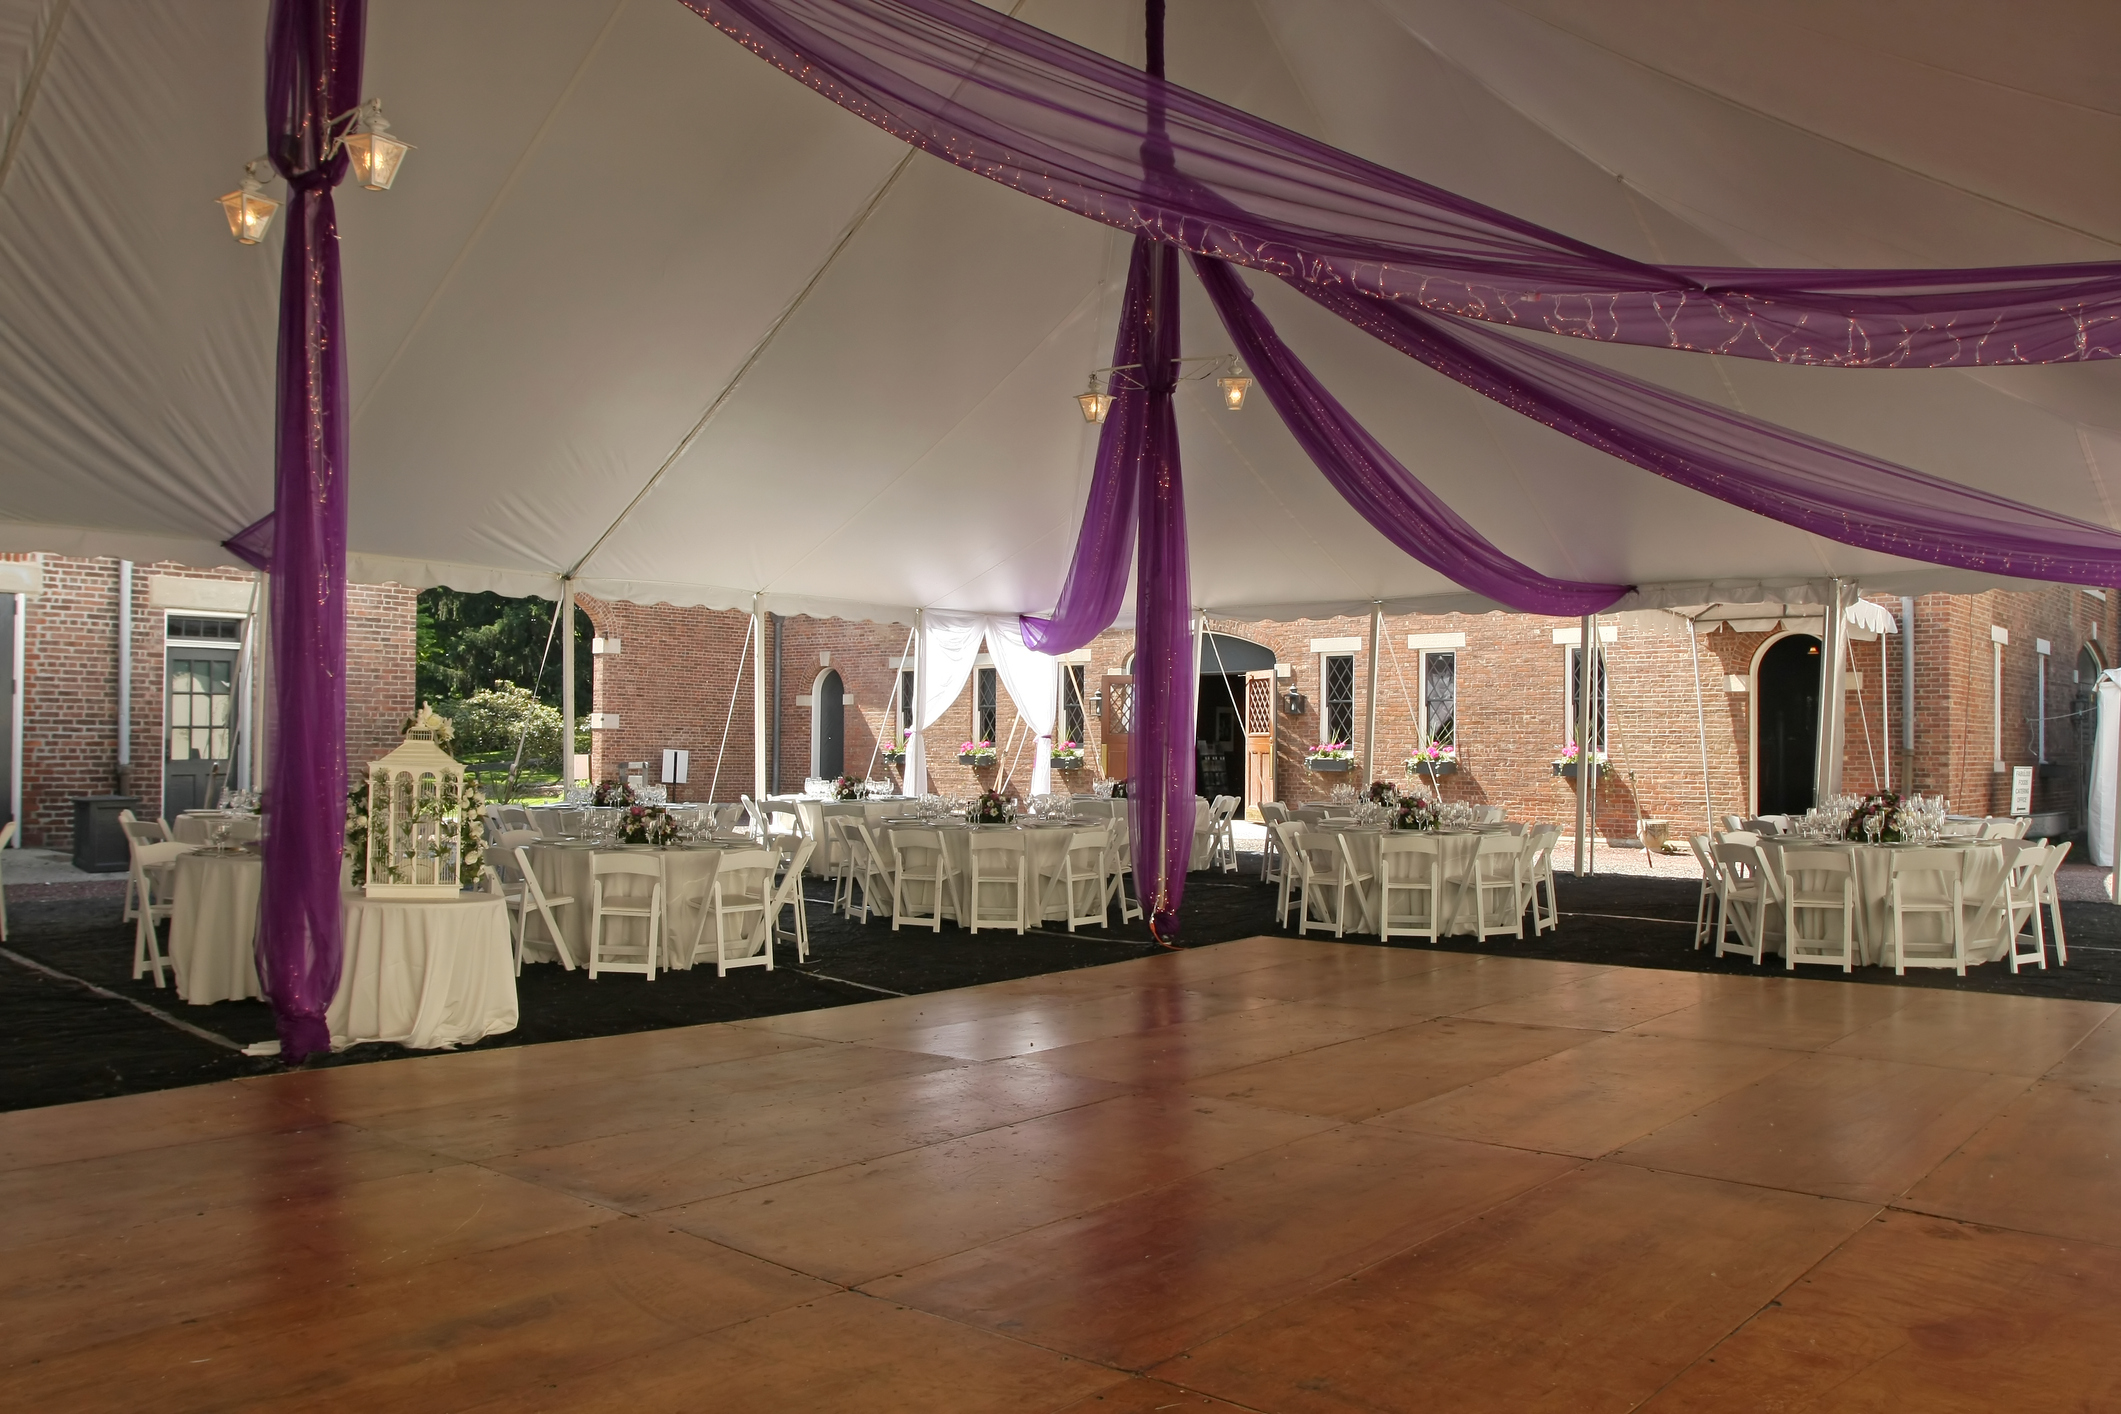 Dance Floor and Stage rentals for parties and weddings